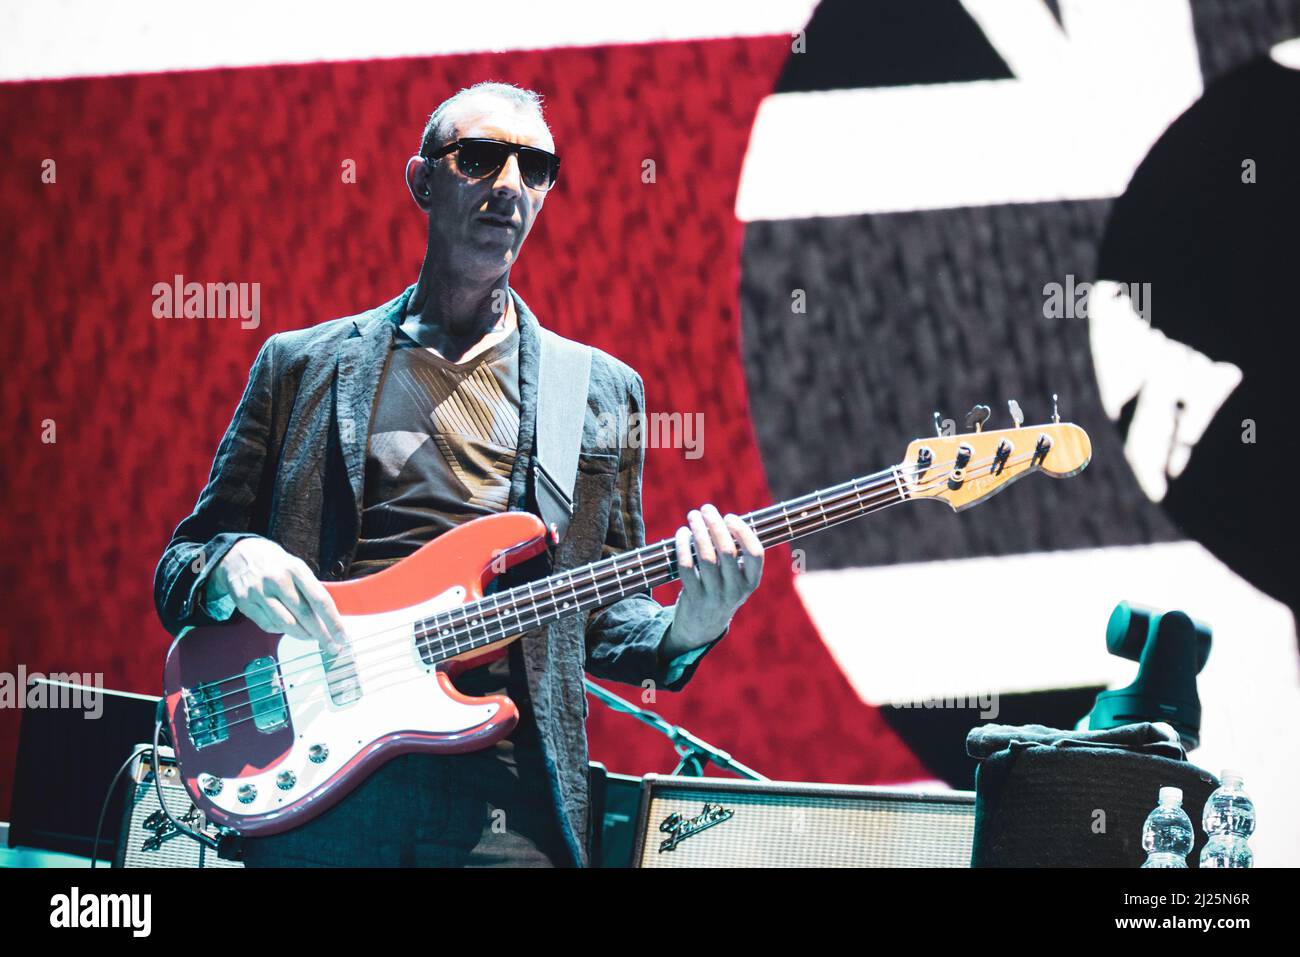 ITALY, BOLOGNA, UNIPOL ARENA 2016: Pino Palladino, bassist of the British rock band “The Who”, performing live on stage for the “Back to the Who” European tour Stock Photo